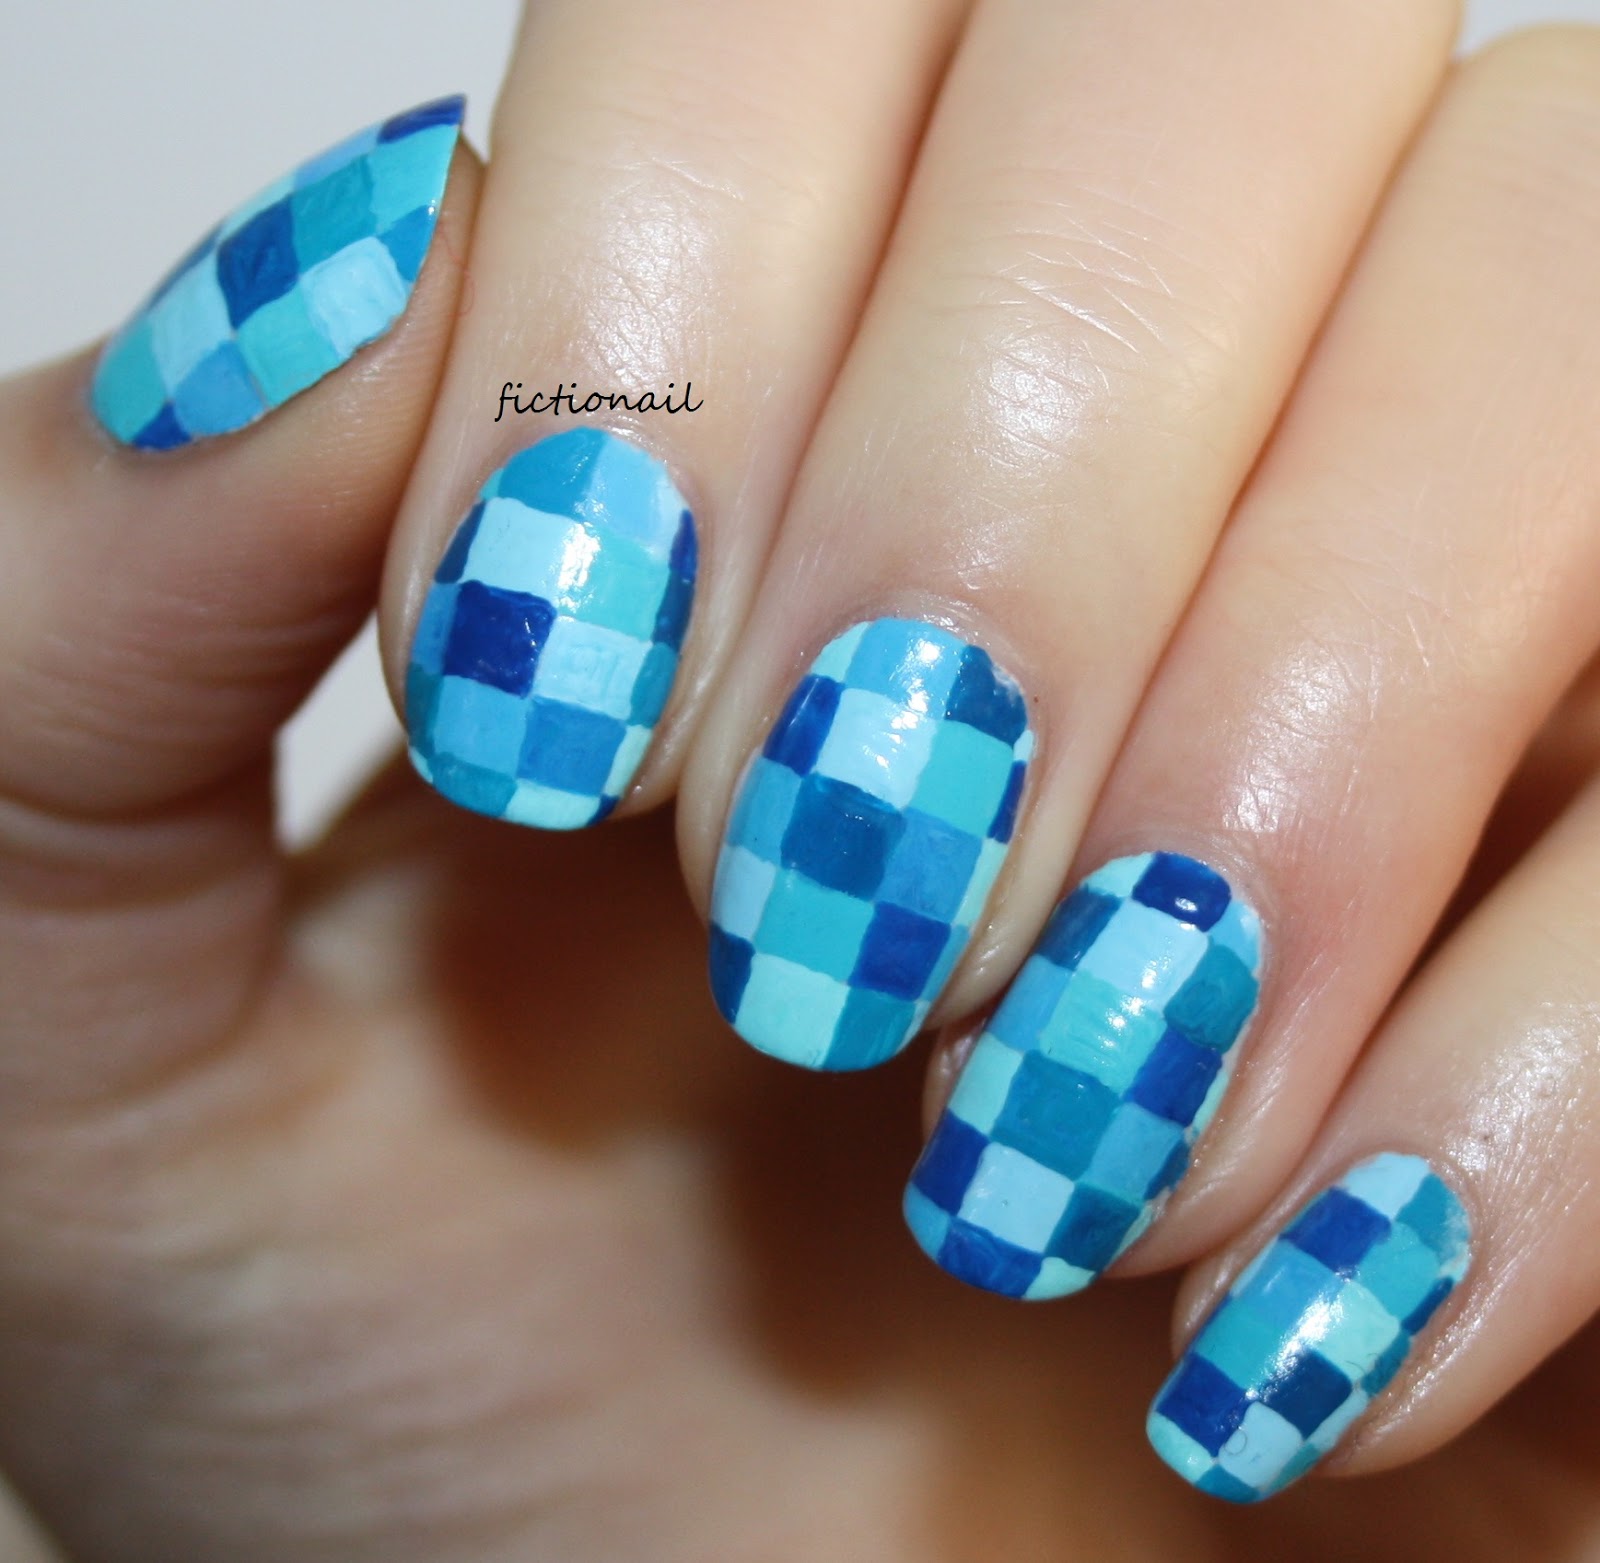 50 Simple Summer Square Acrylic Nails Designs In 2019 | Square acrylic nails,  Acrylic nail designs, Square nails